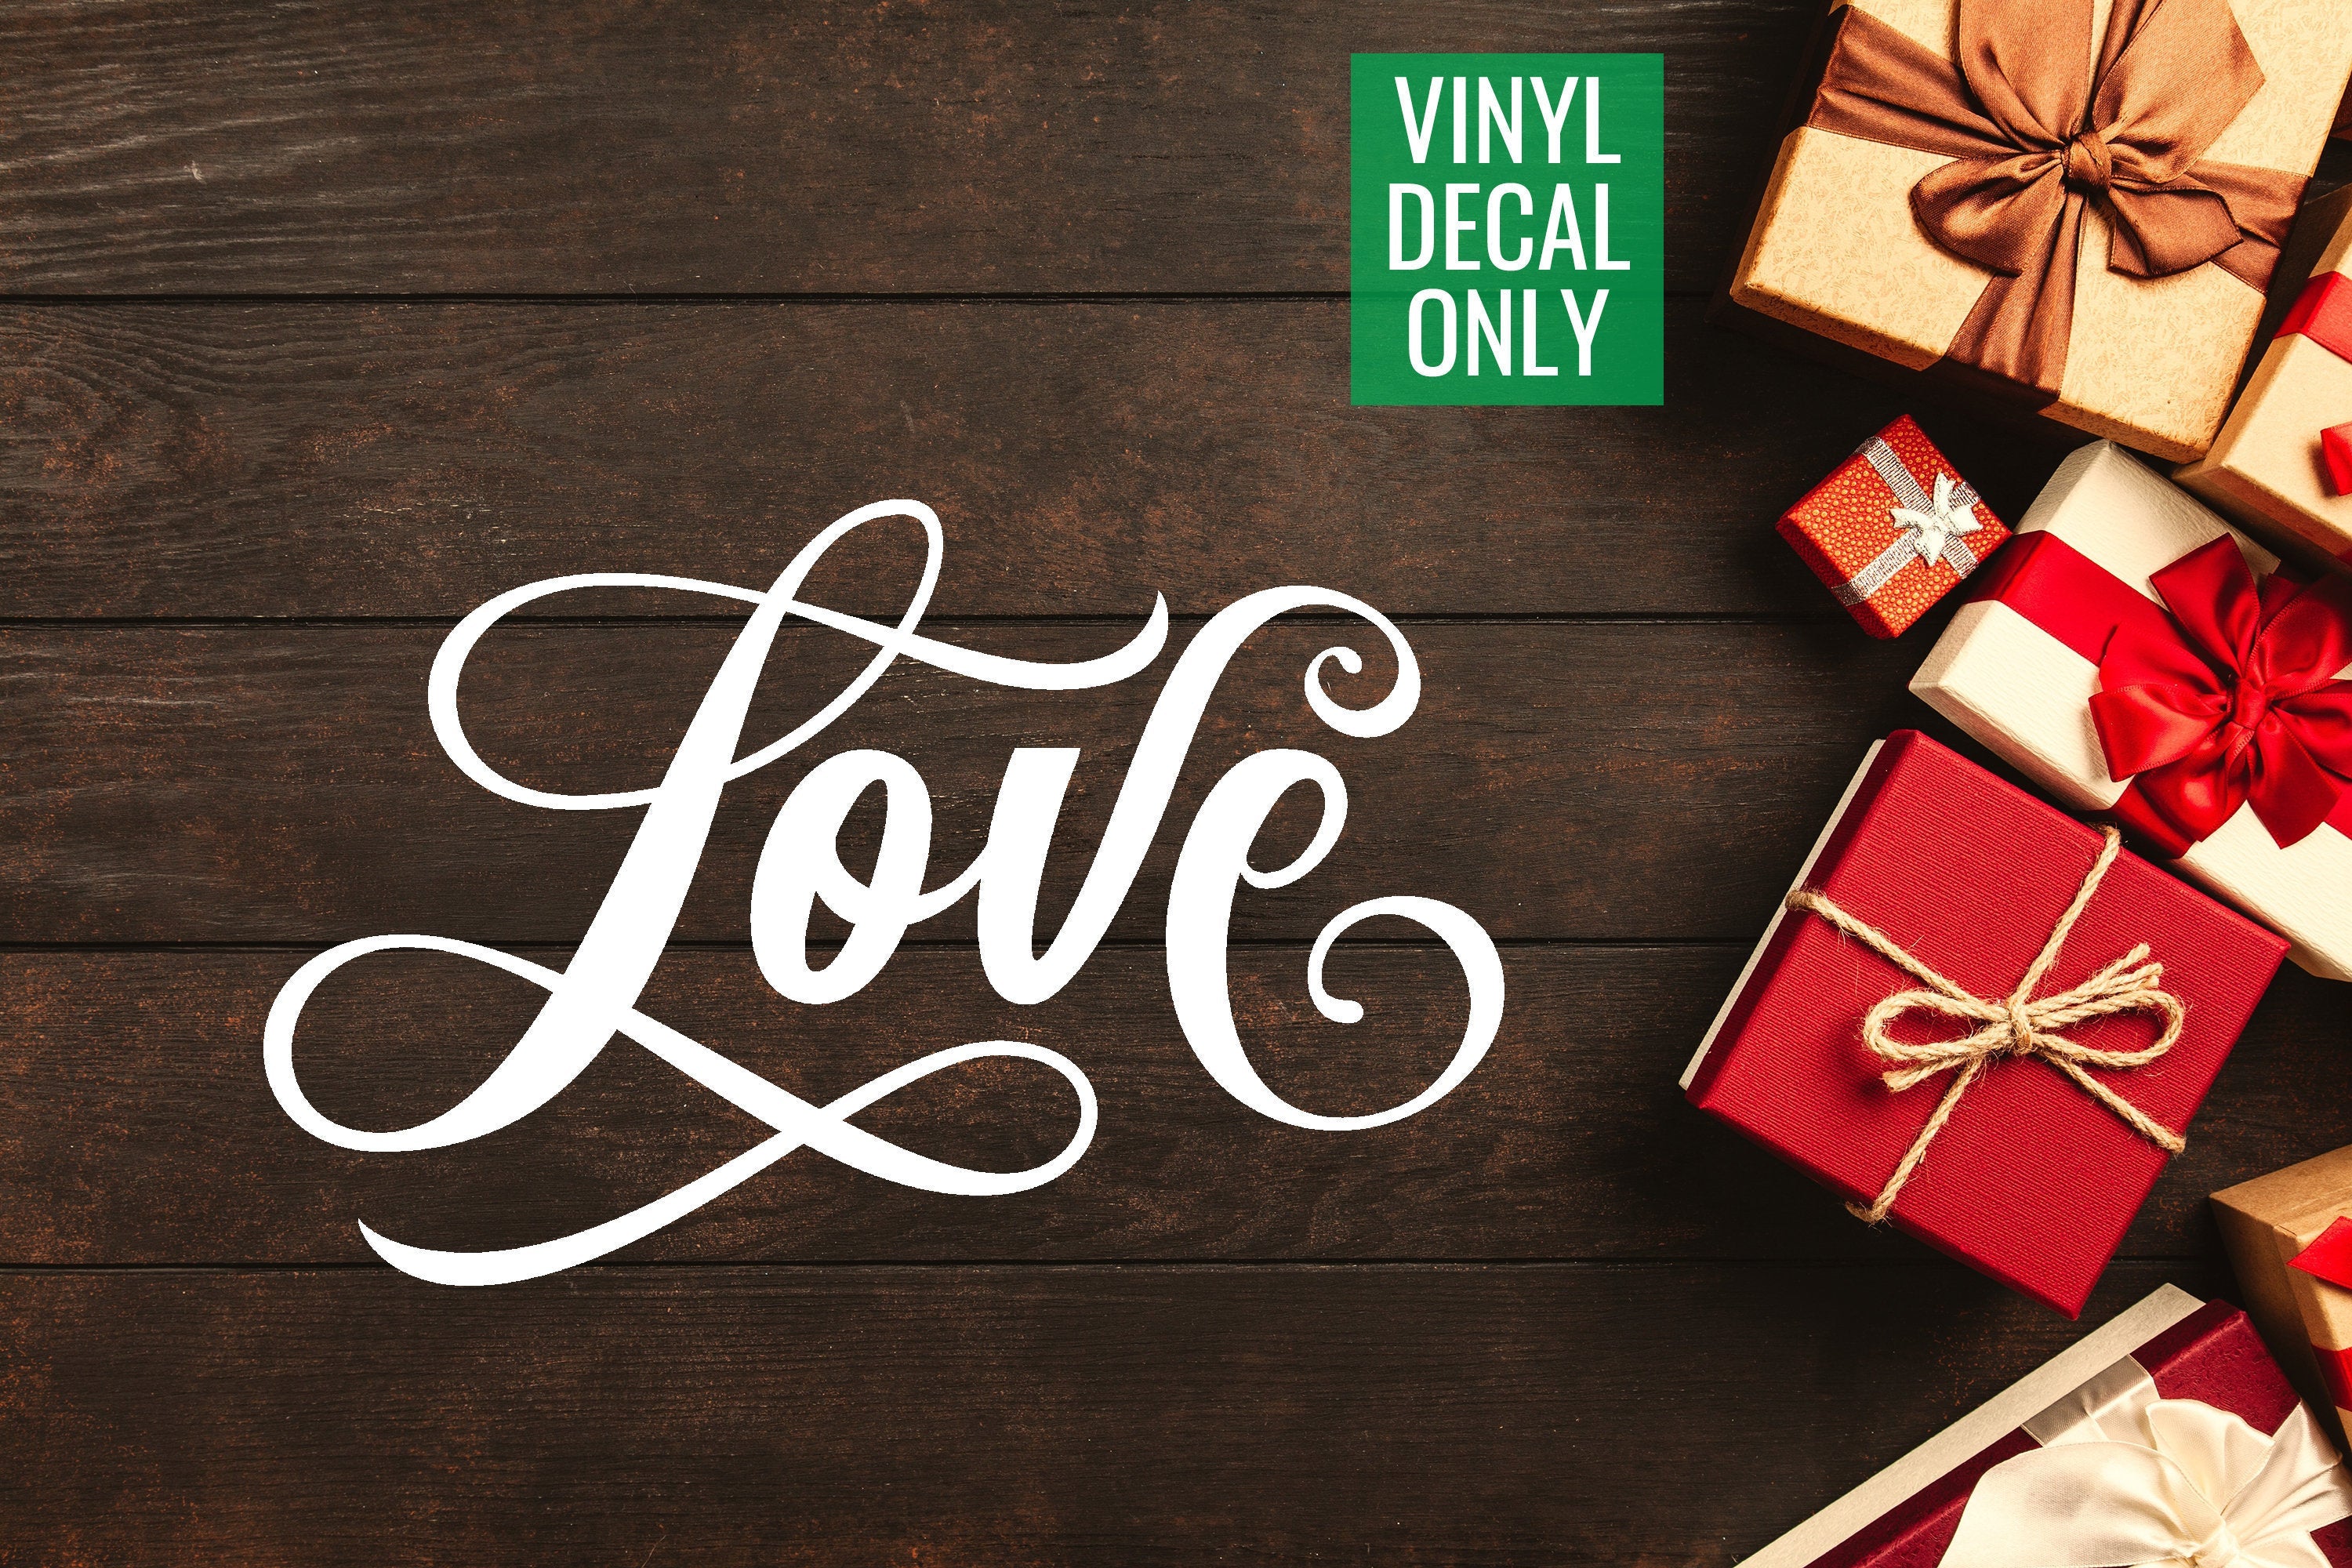 Love Vinyl Decal for Signs, Ornaments, Walls, Doors, Glass, Metal, Wood, Decor for Holiday Events,